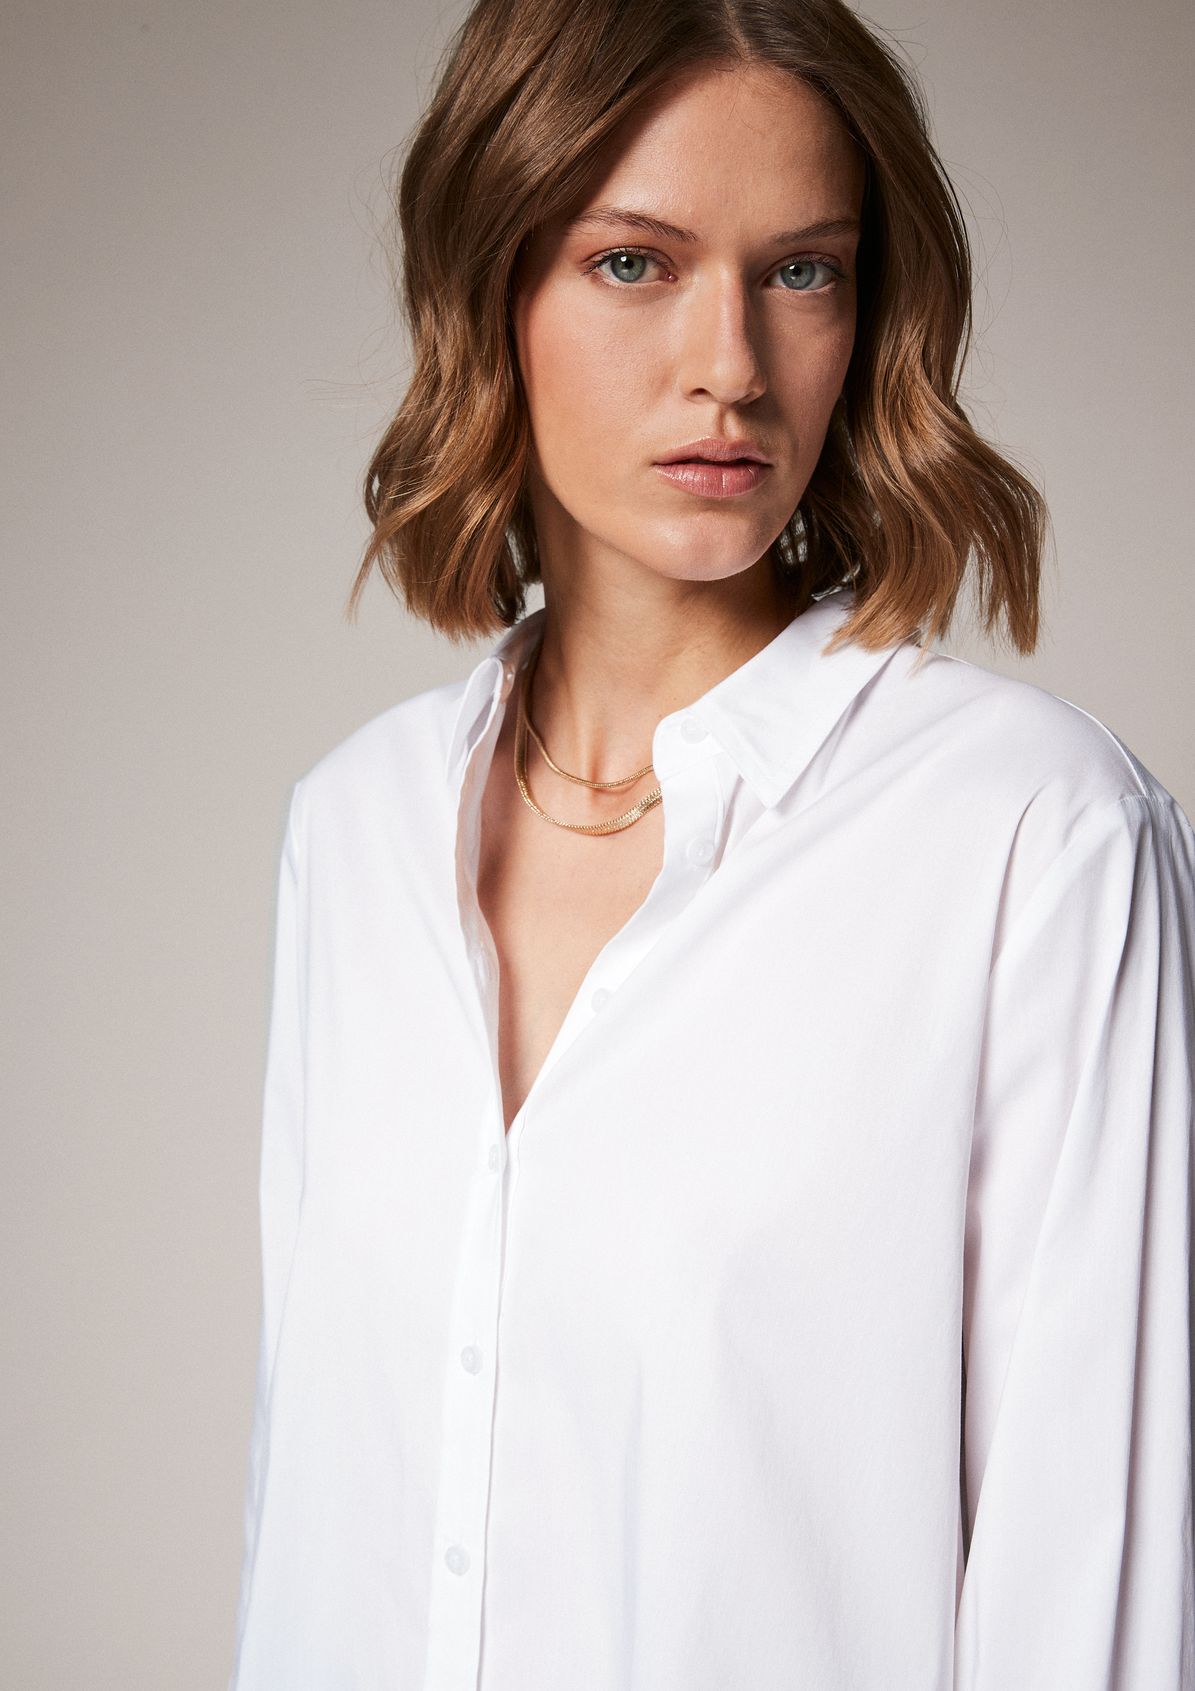 Blouse in a clean look from comma